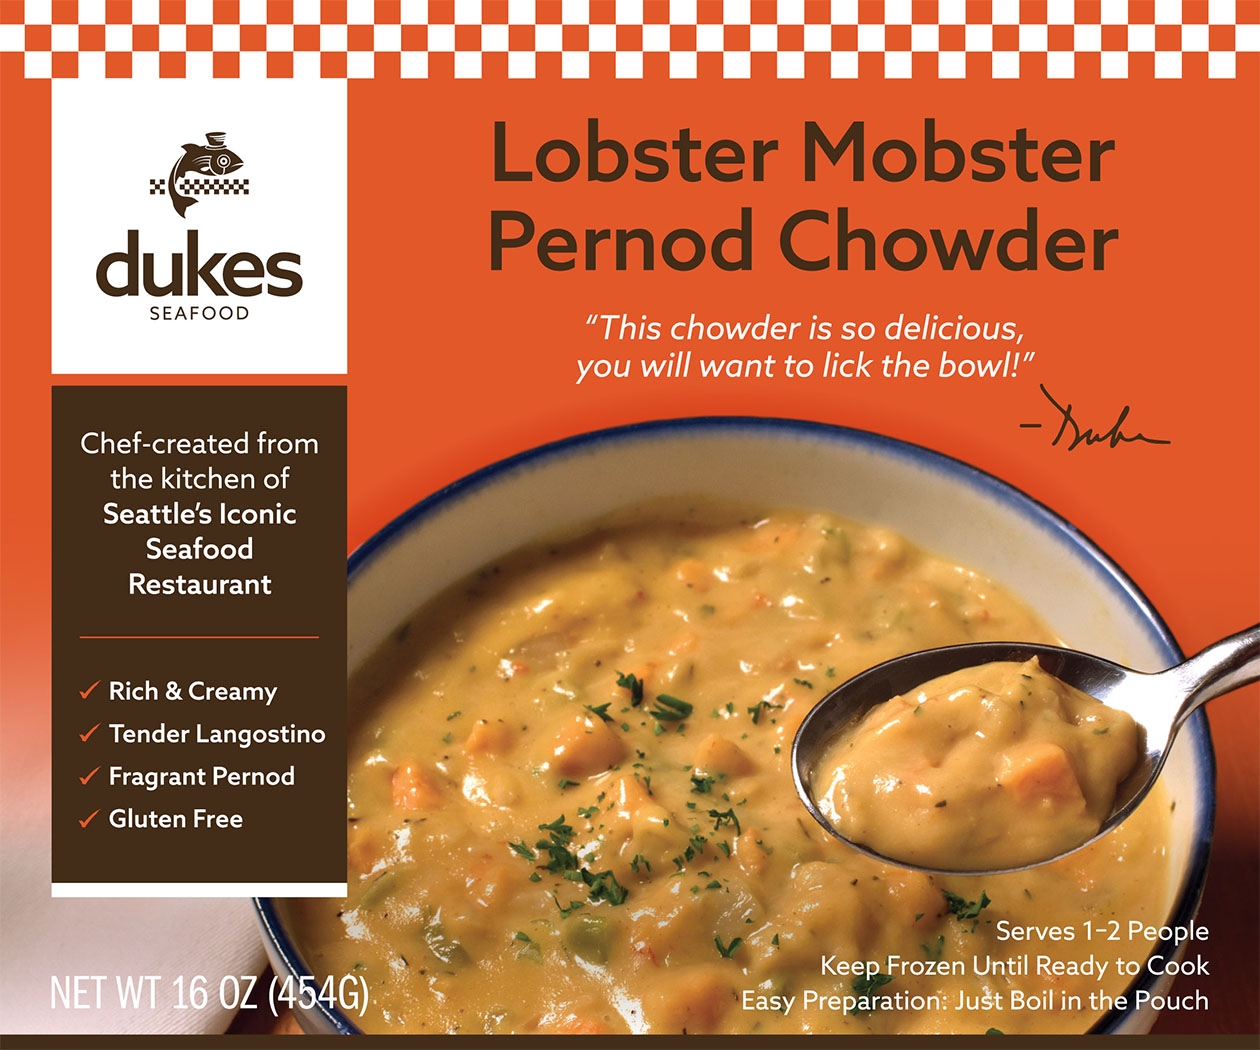 Dukes Seafood Lobster Mobster Pernod  Chowder